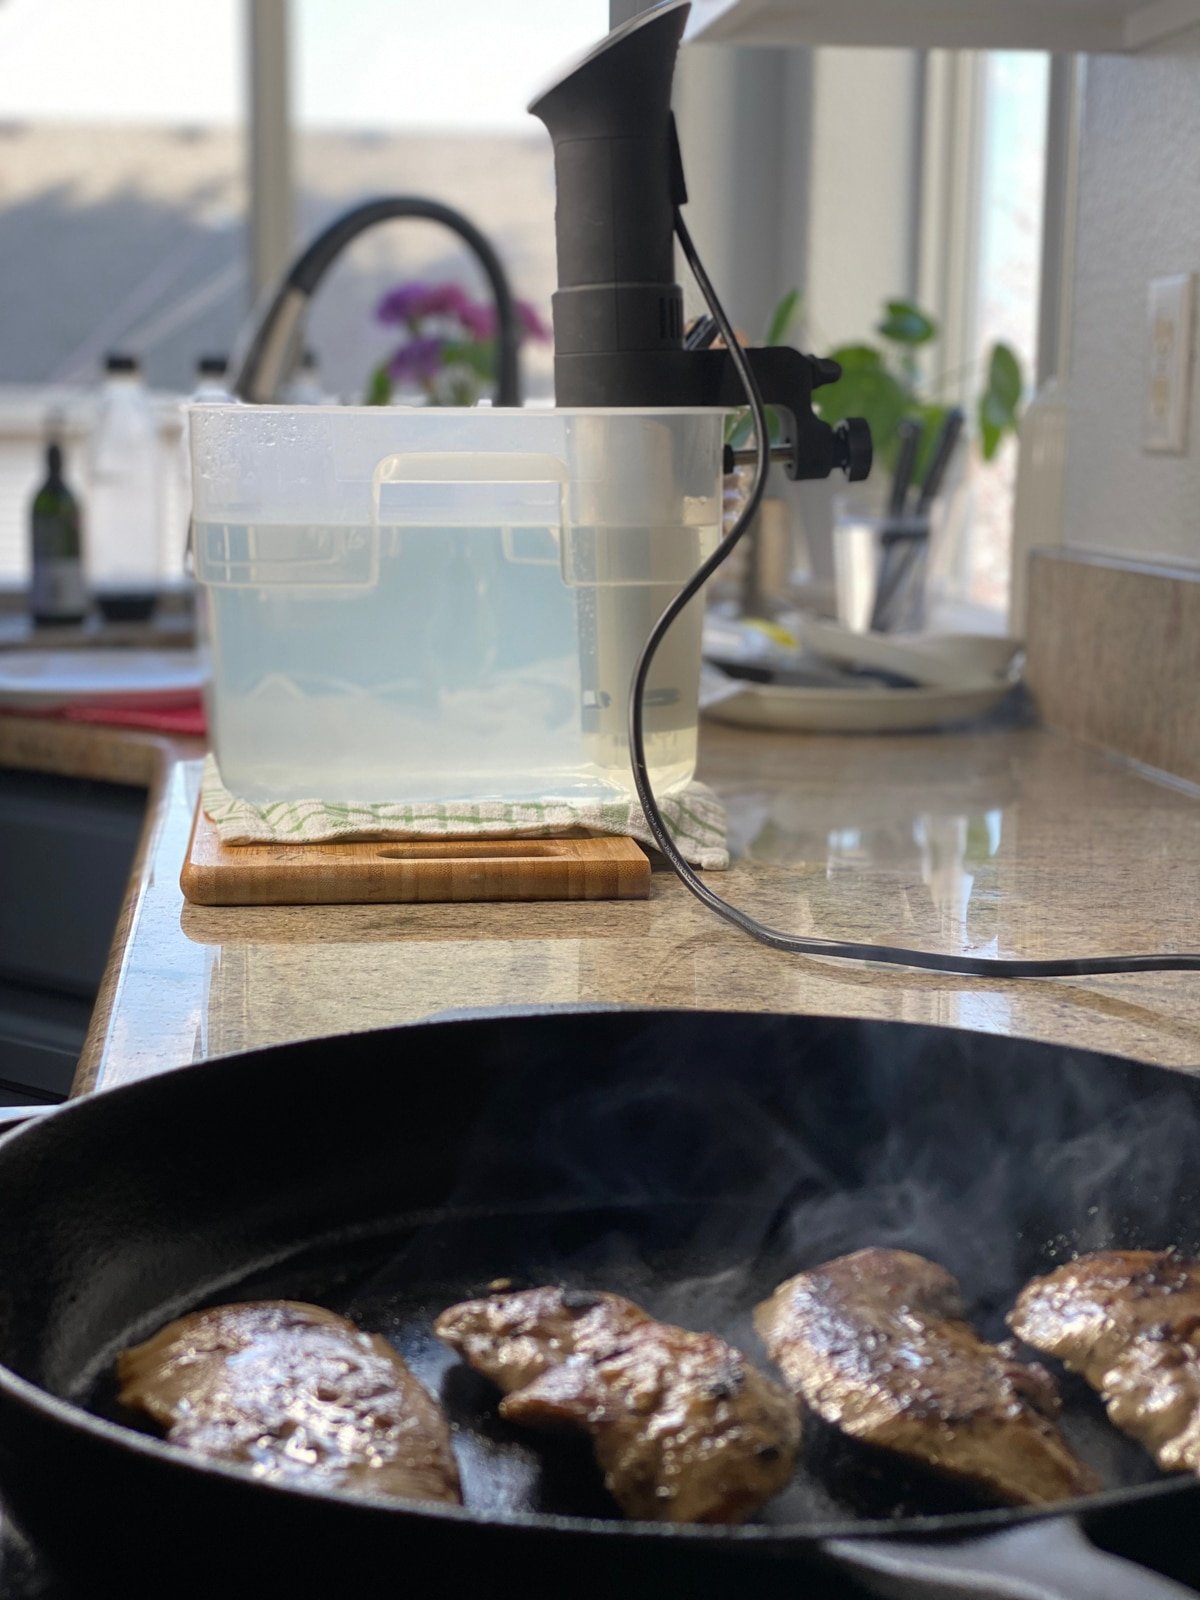 How Long Do You Sous Vide Frozen Chicken Breast?